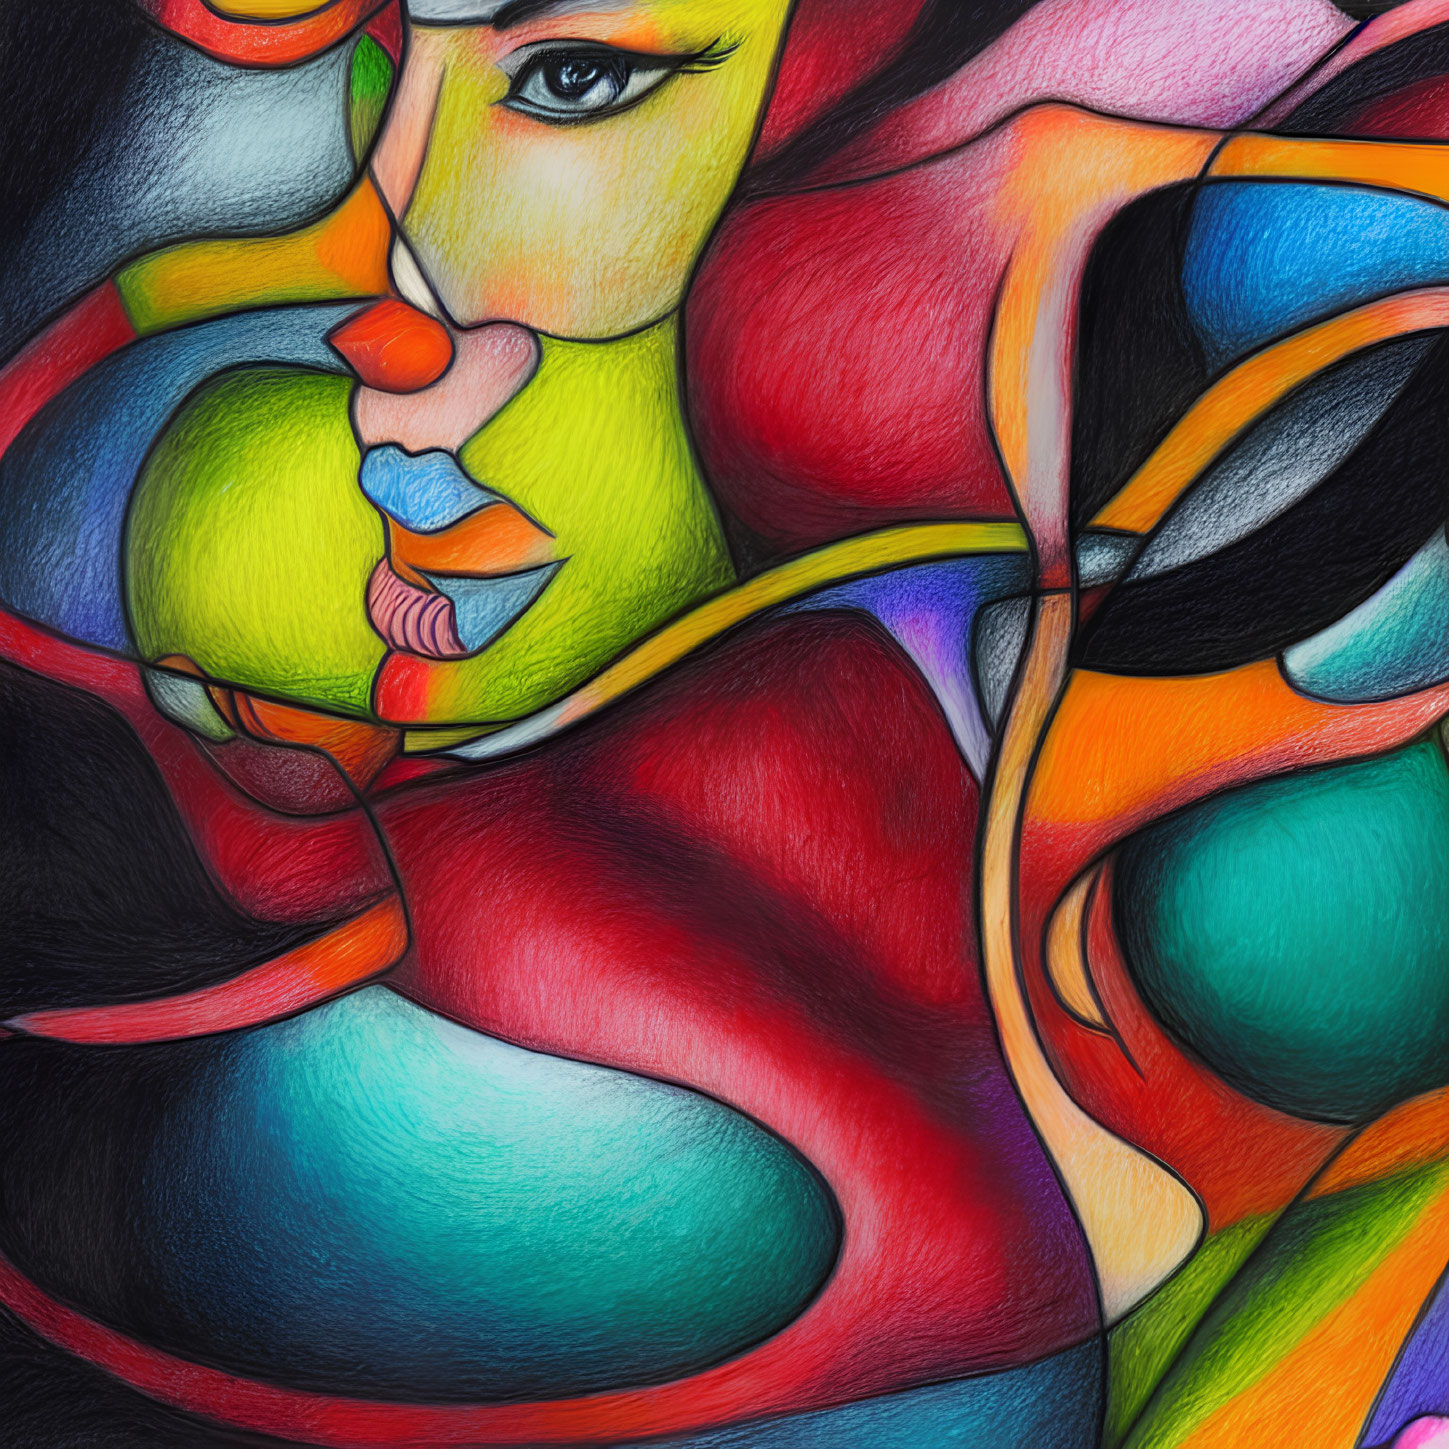 Vibrant abstract art with interlocking shapes and expressive face.